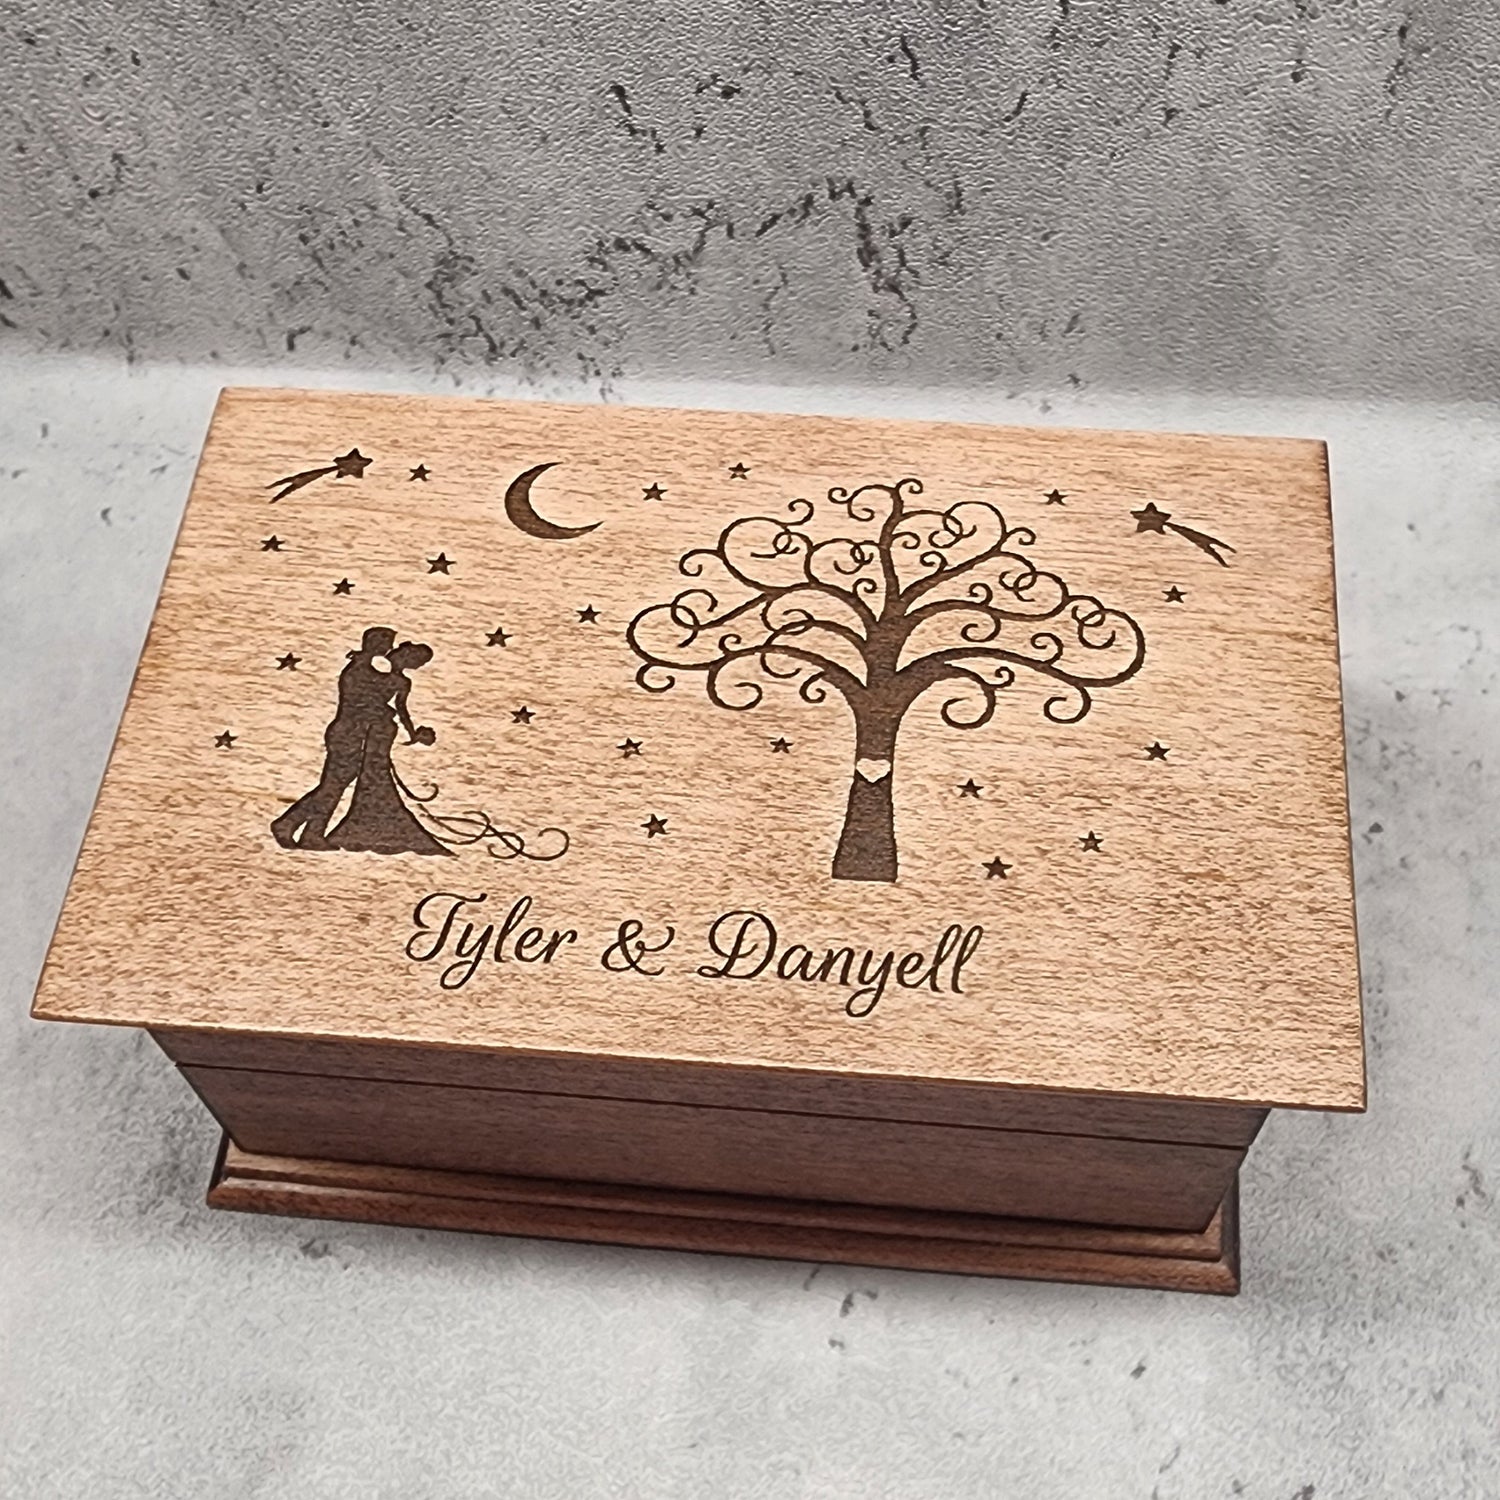 Wedding jewelry box with bride and groom a tree with a heart carved in the trunk, moon and stars with shooting stars with names, choose your song and color